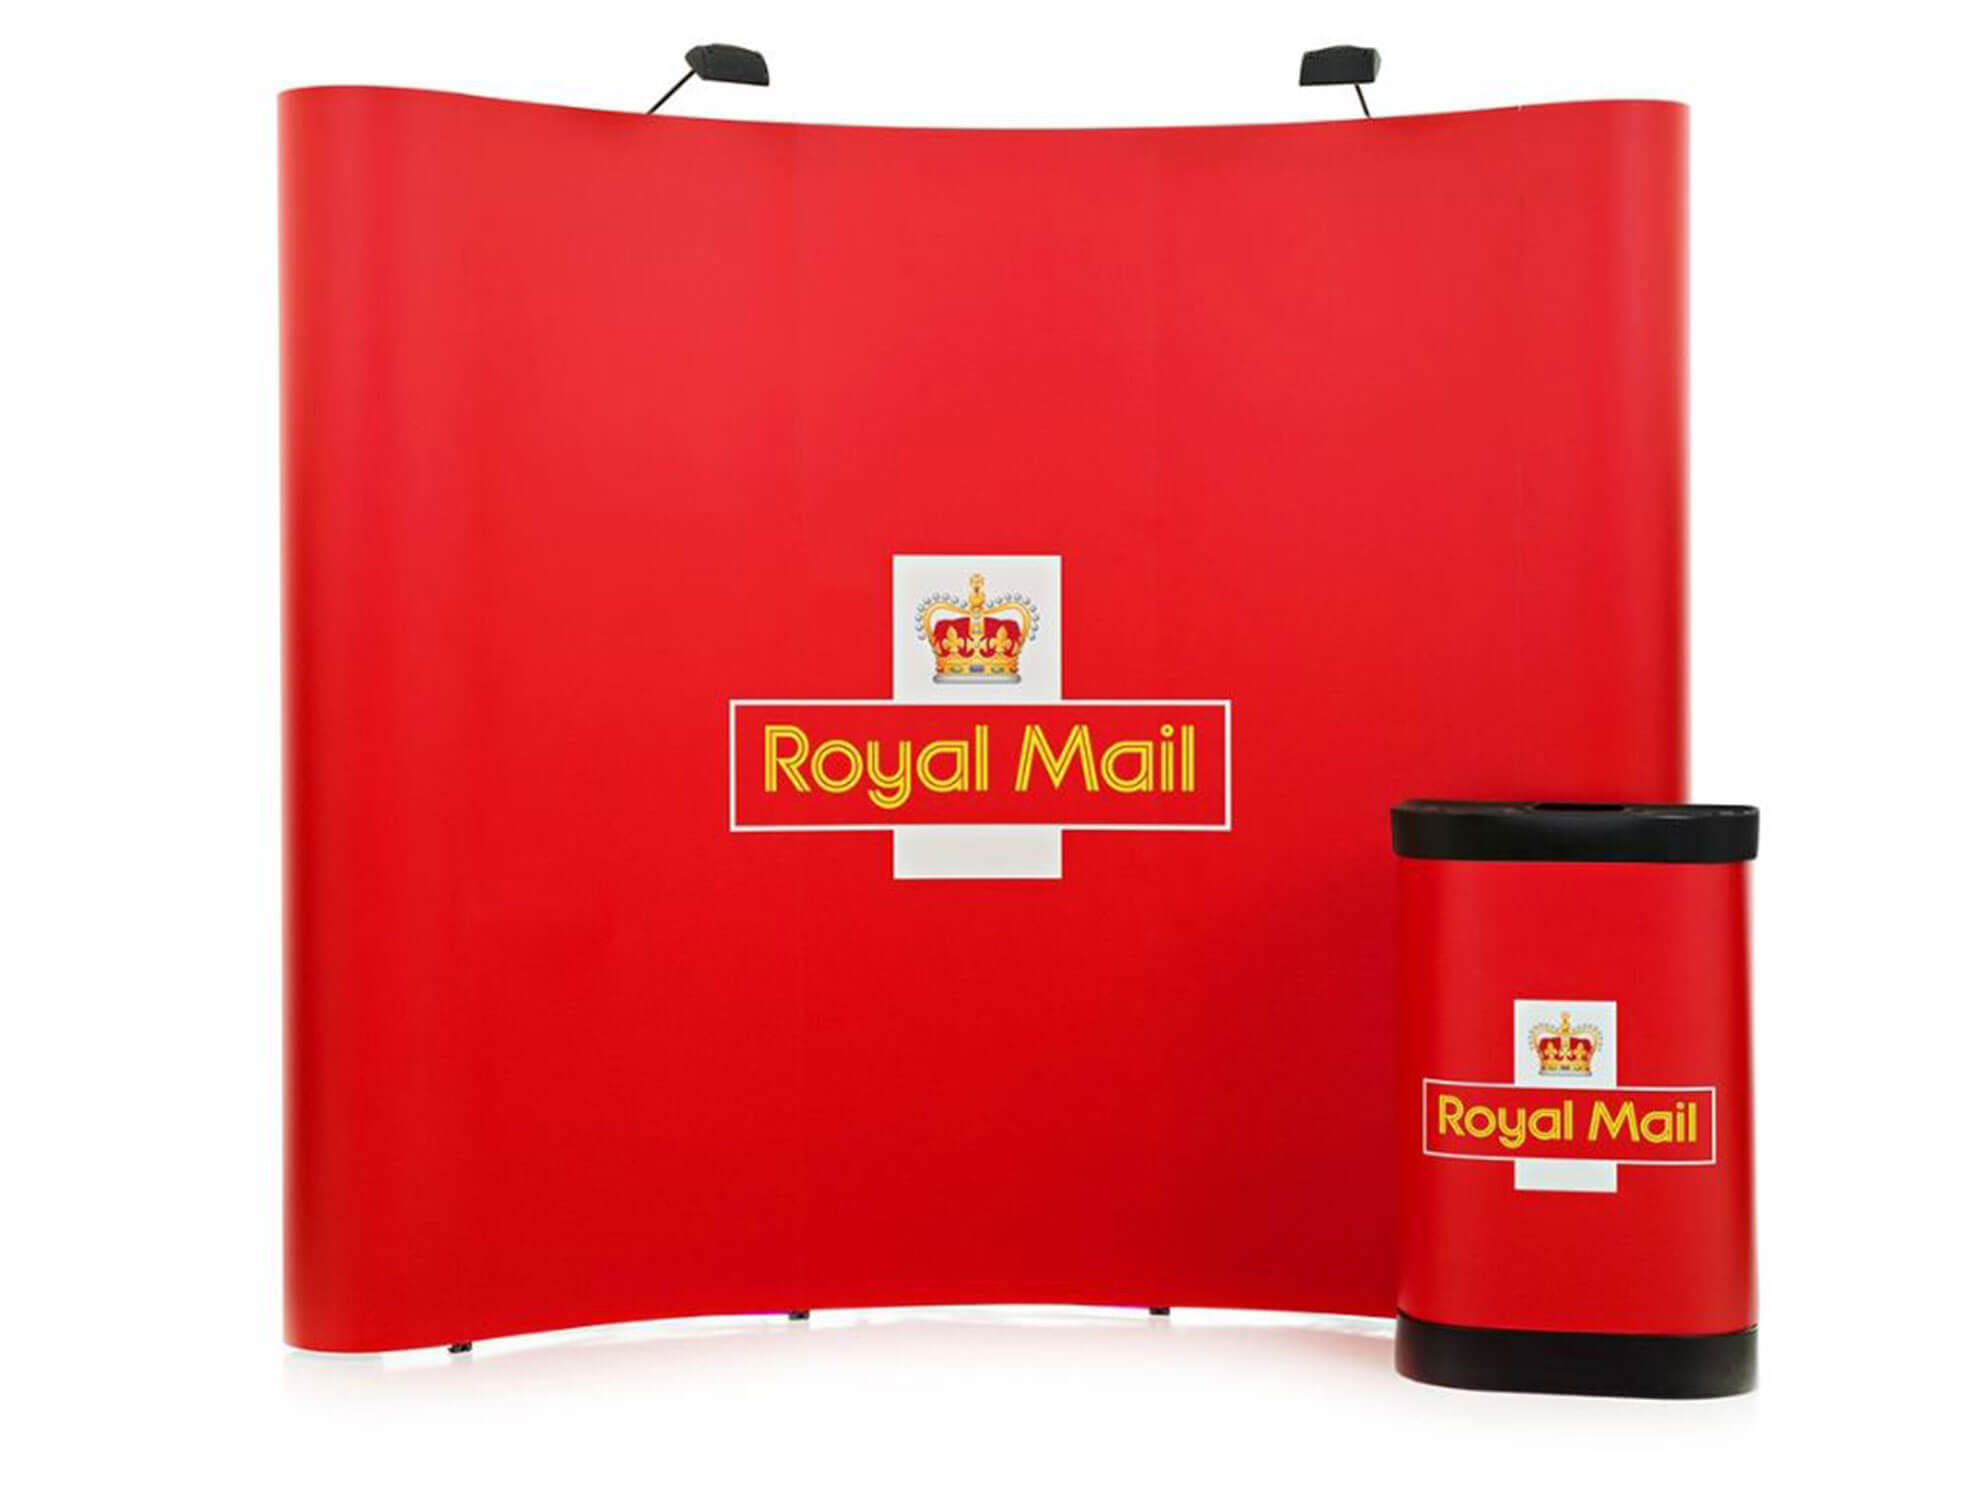 Royal Mail curved pop-up display stand and presentation stand